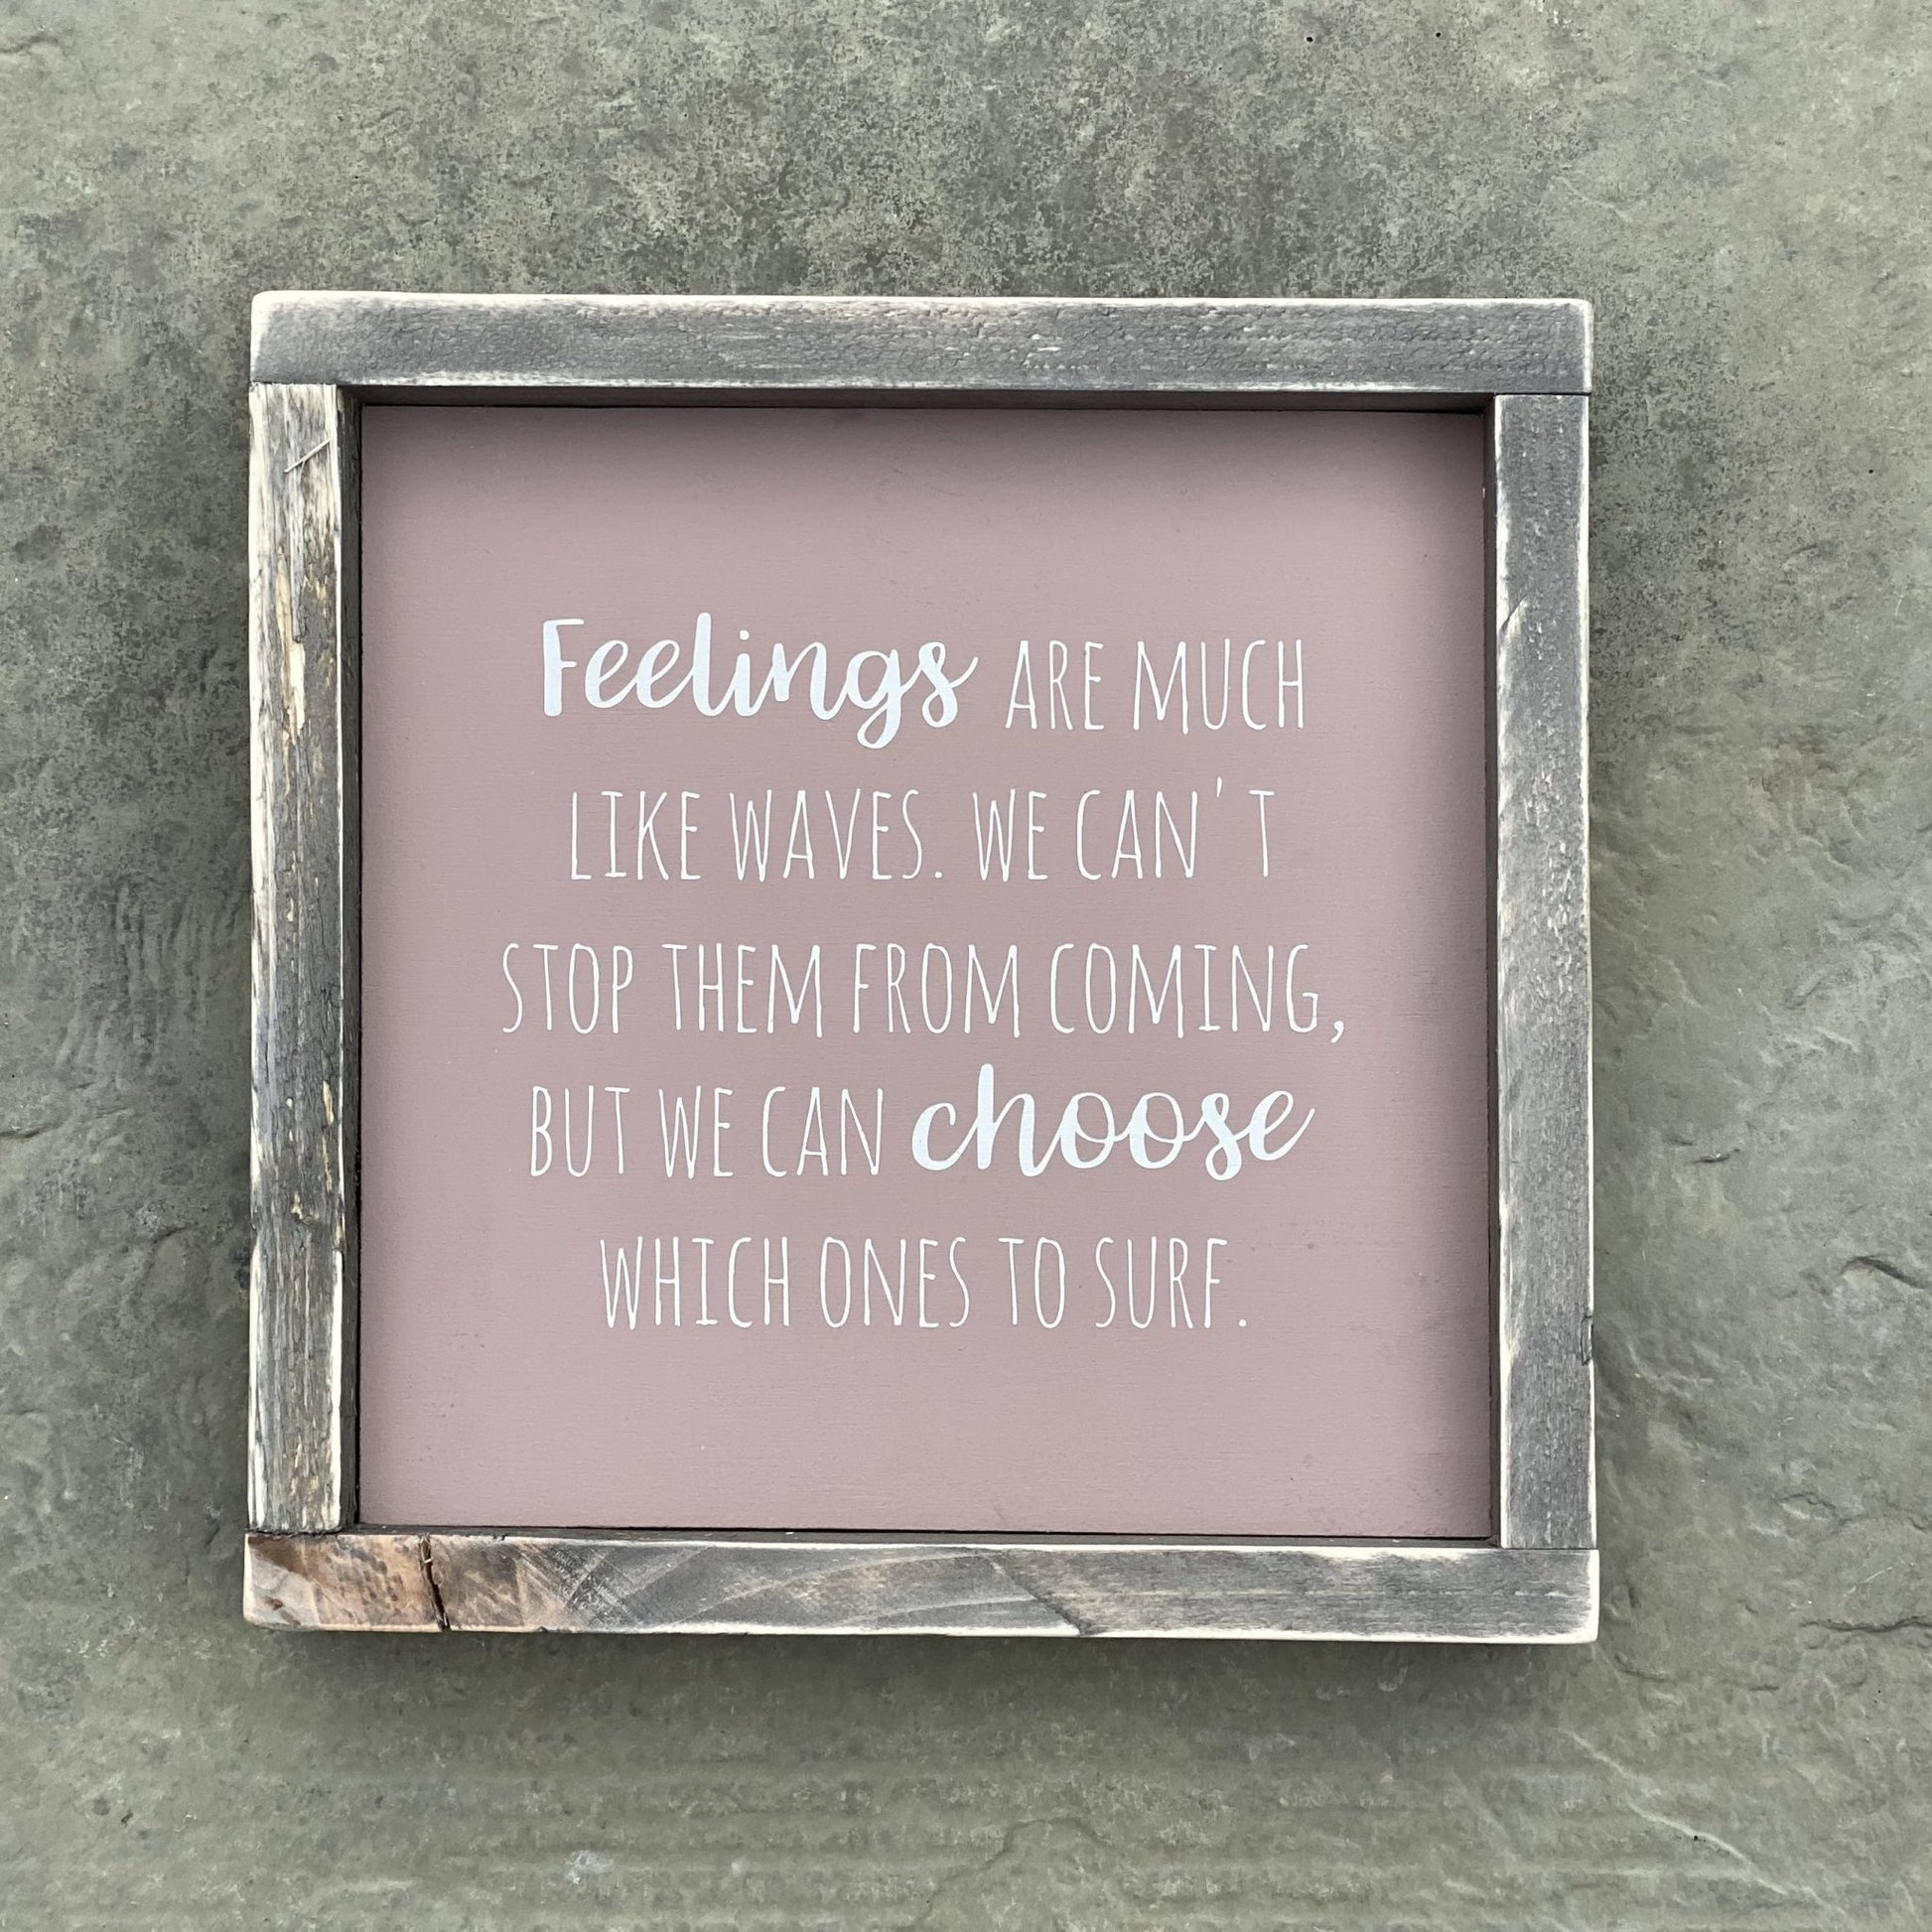 Feelings | Framed Wood Sign | #BrainTumourResearch - The Imperfect Wood Company - Framed Wood Sign